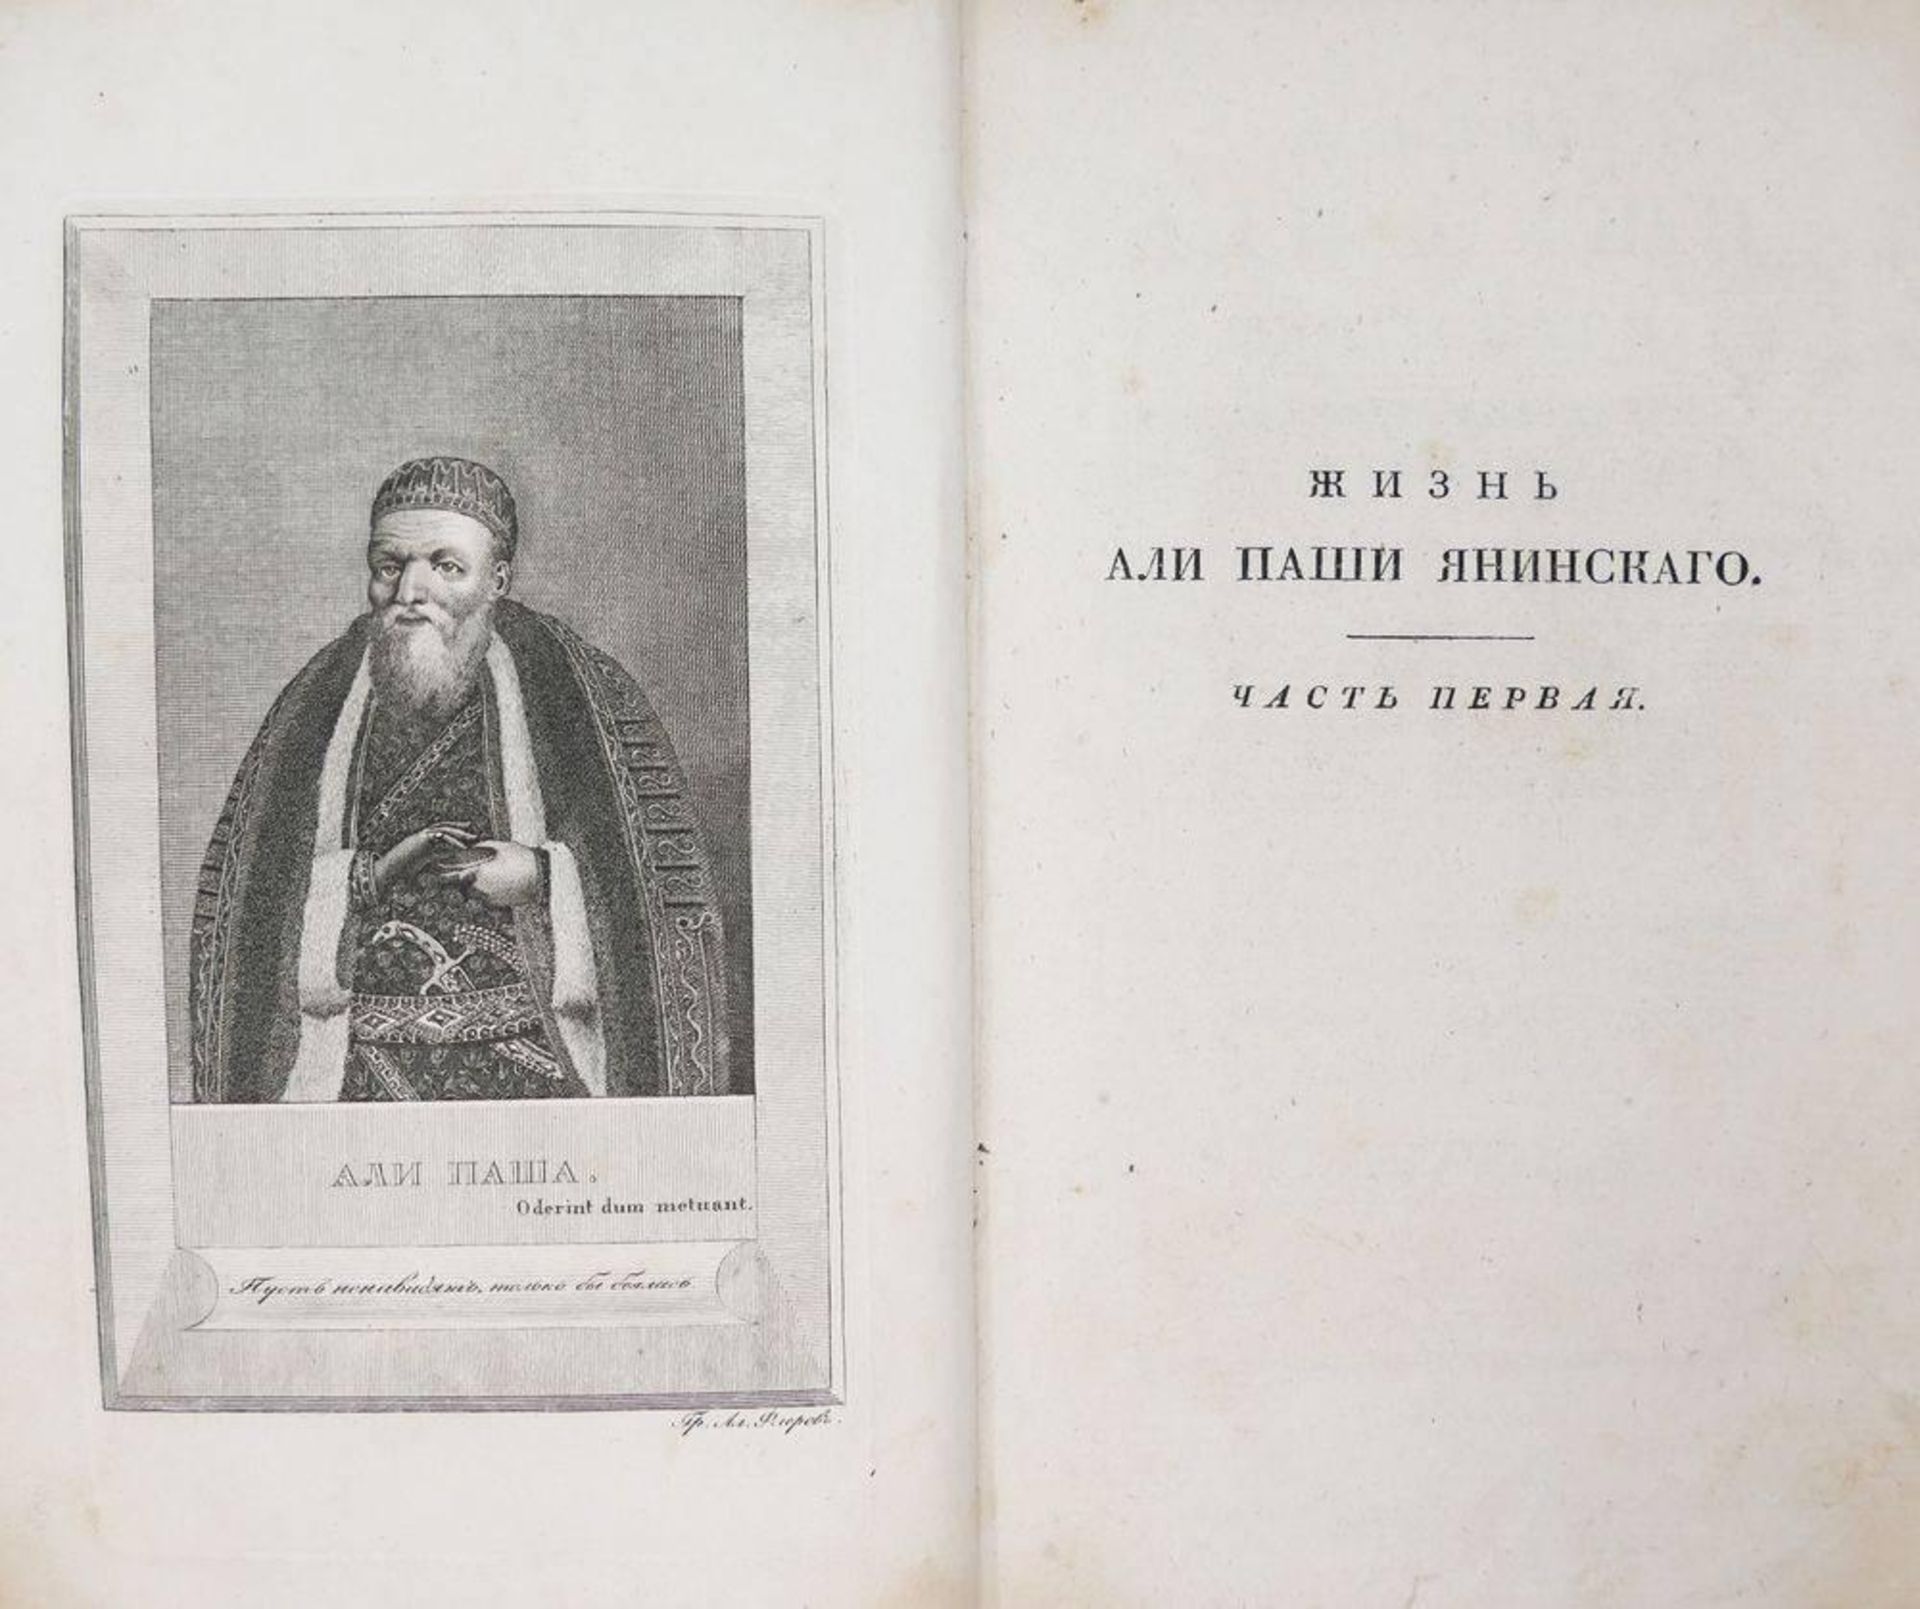 POUKEVIL F.-S. (1770-1838) The life of Ali Pasha Yaninsky from his childhood to 1821, [...]